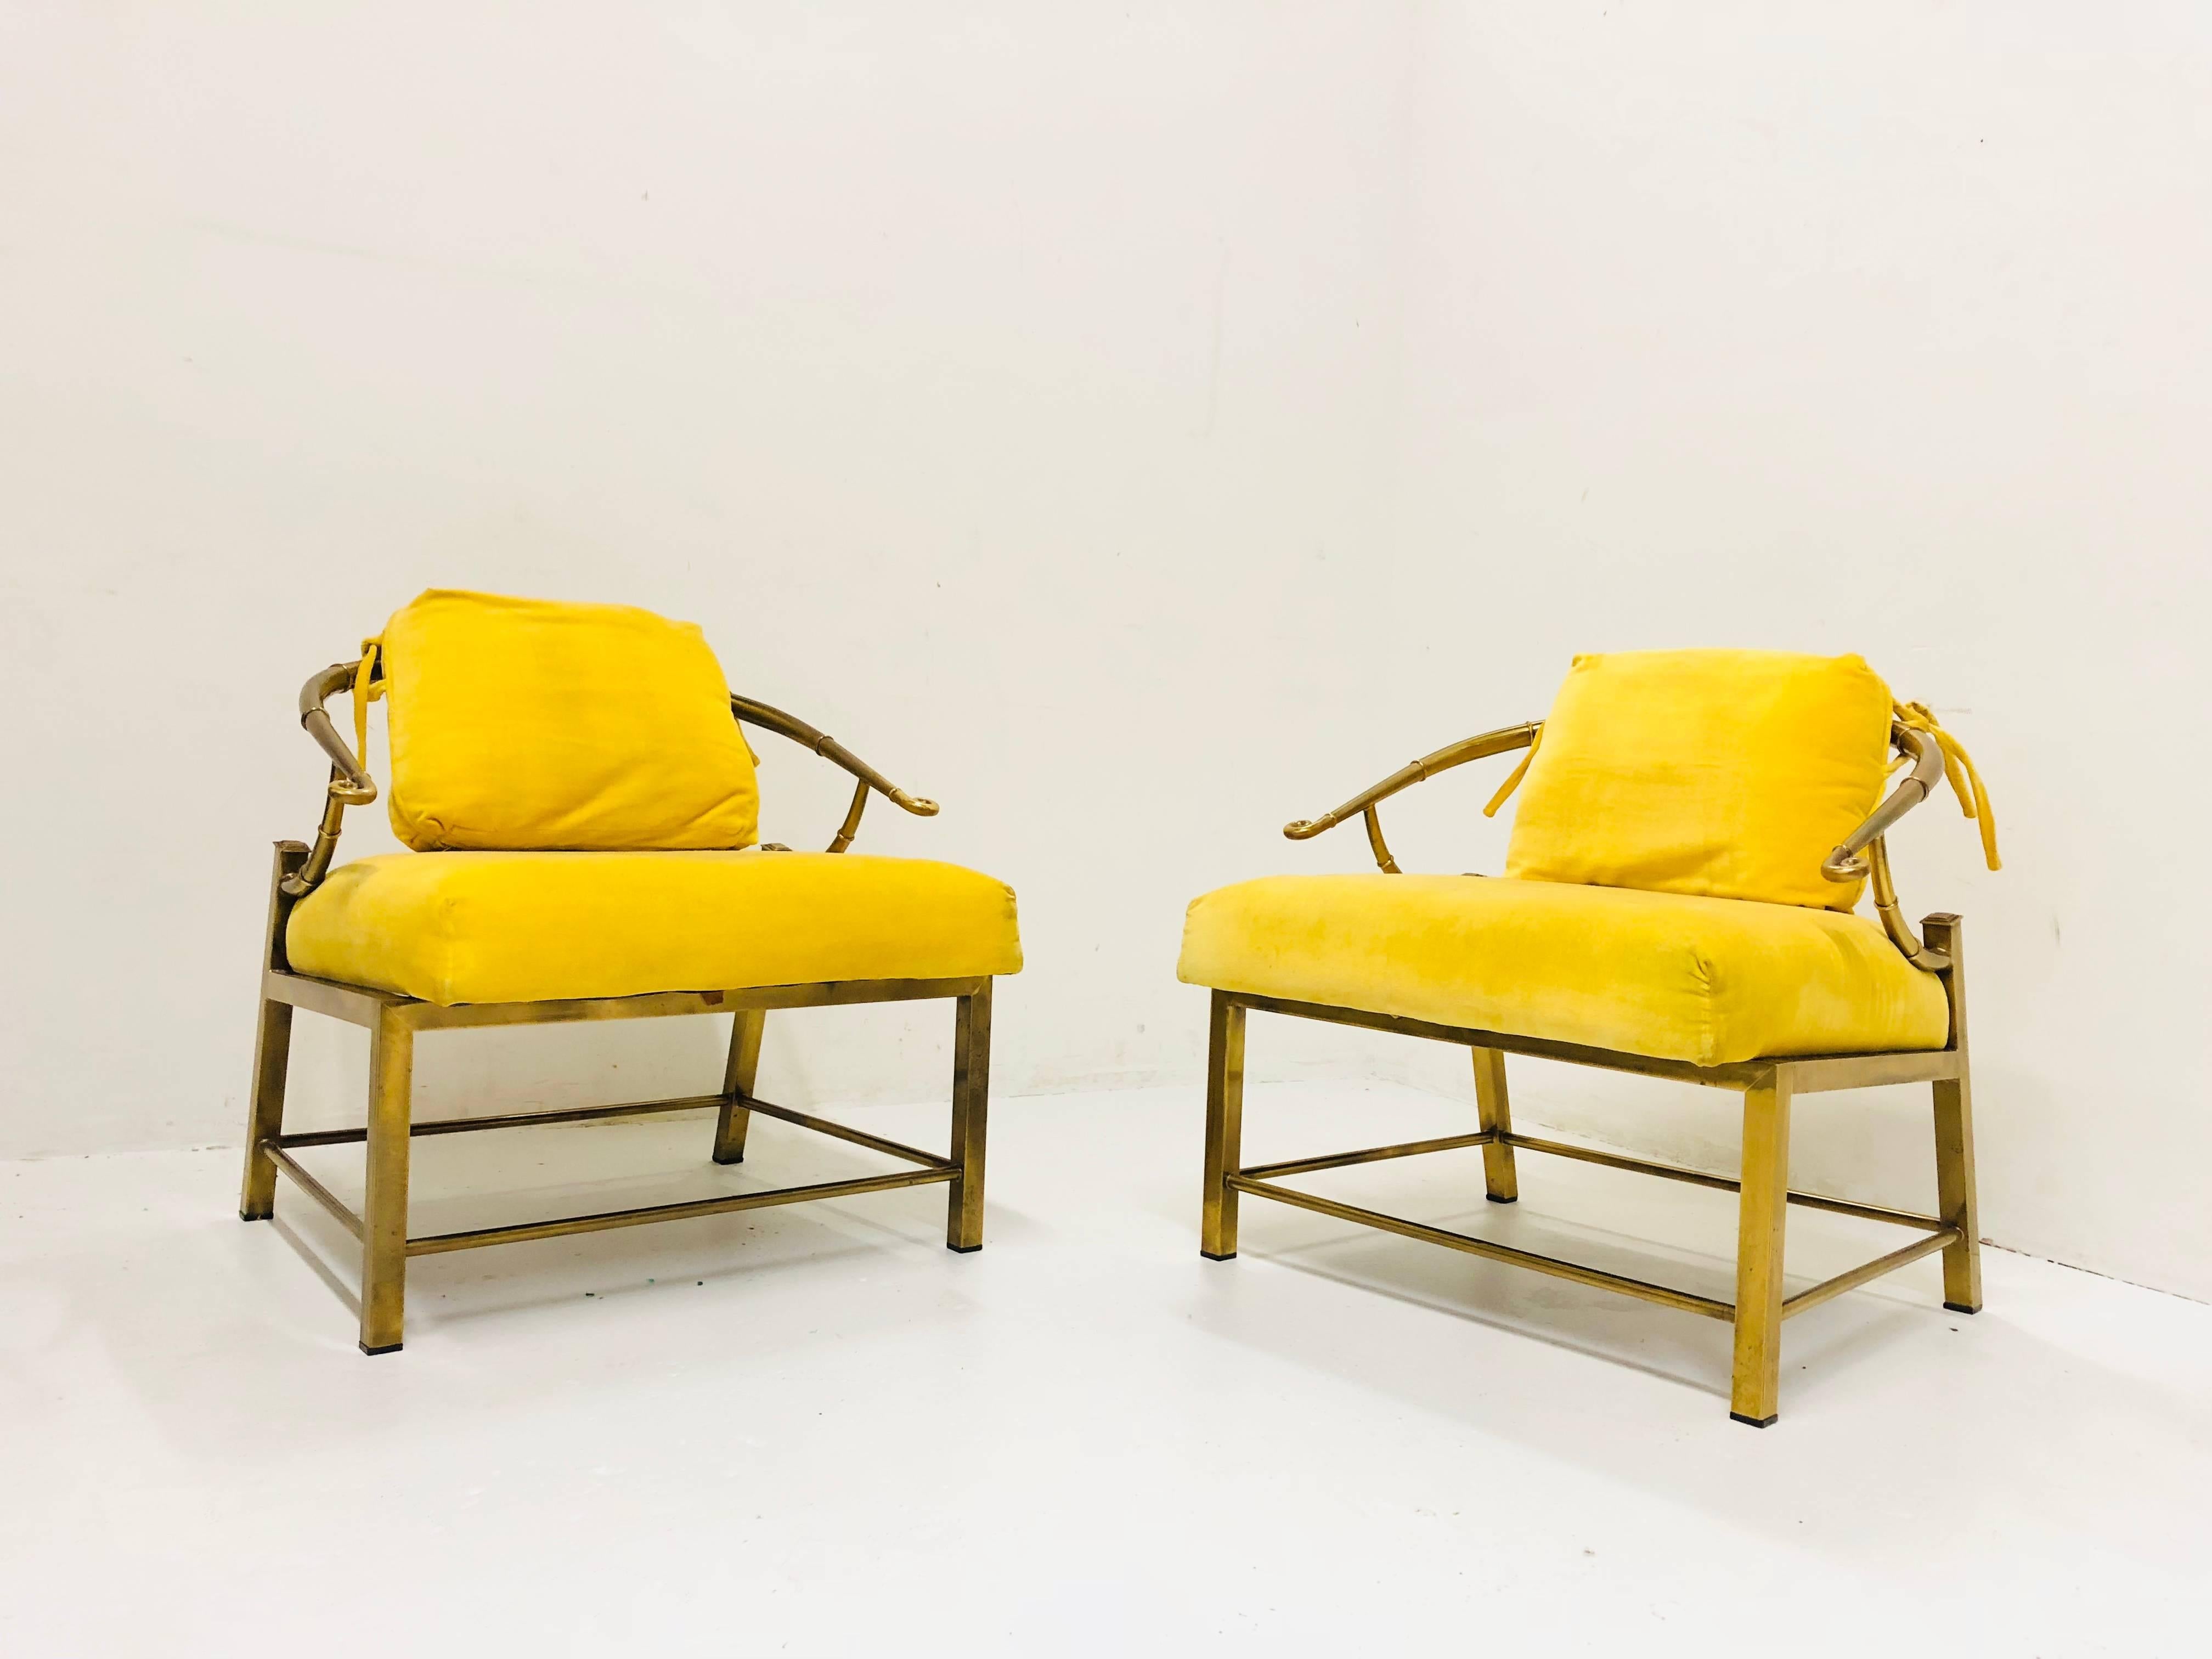 Pair of brass Ming lounge chairs with yellow velvet. New upholstery and refinishing is recommended, circa 1960s.

Dimensions: 26